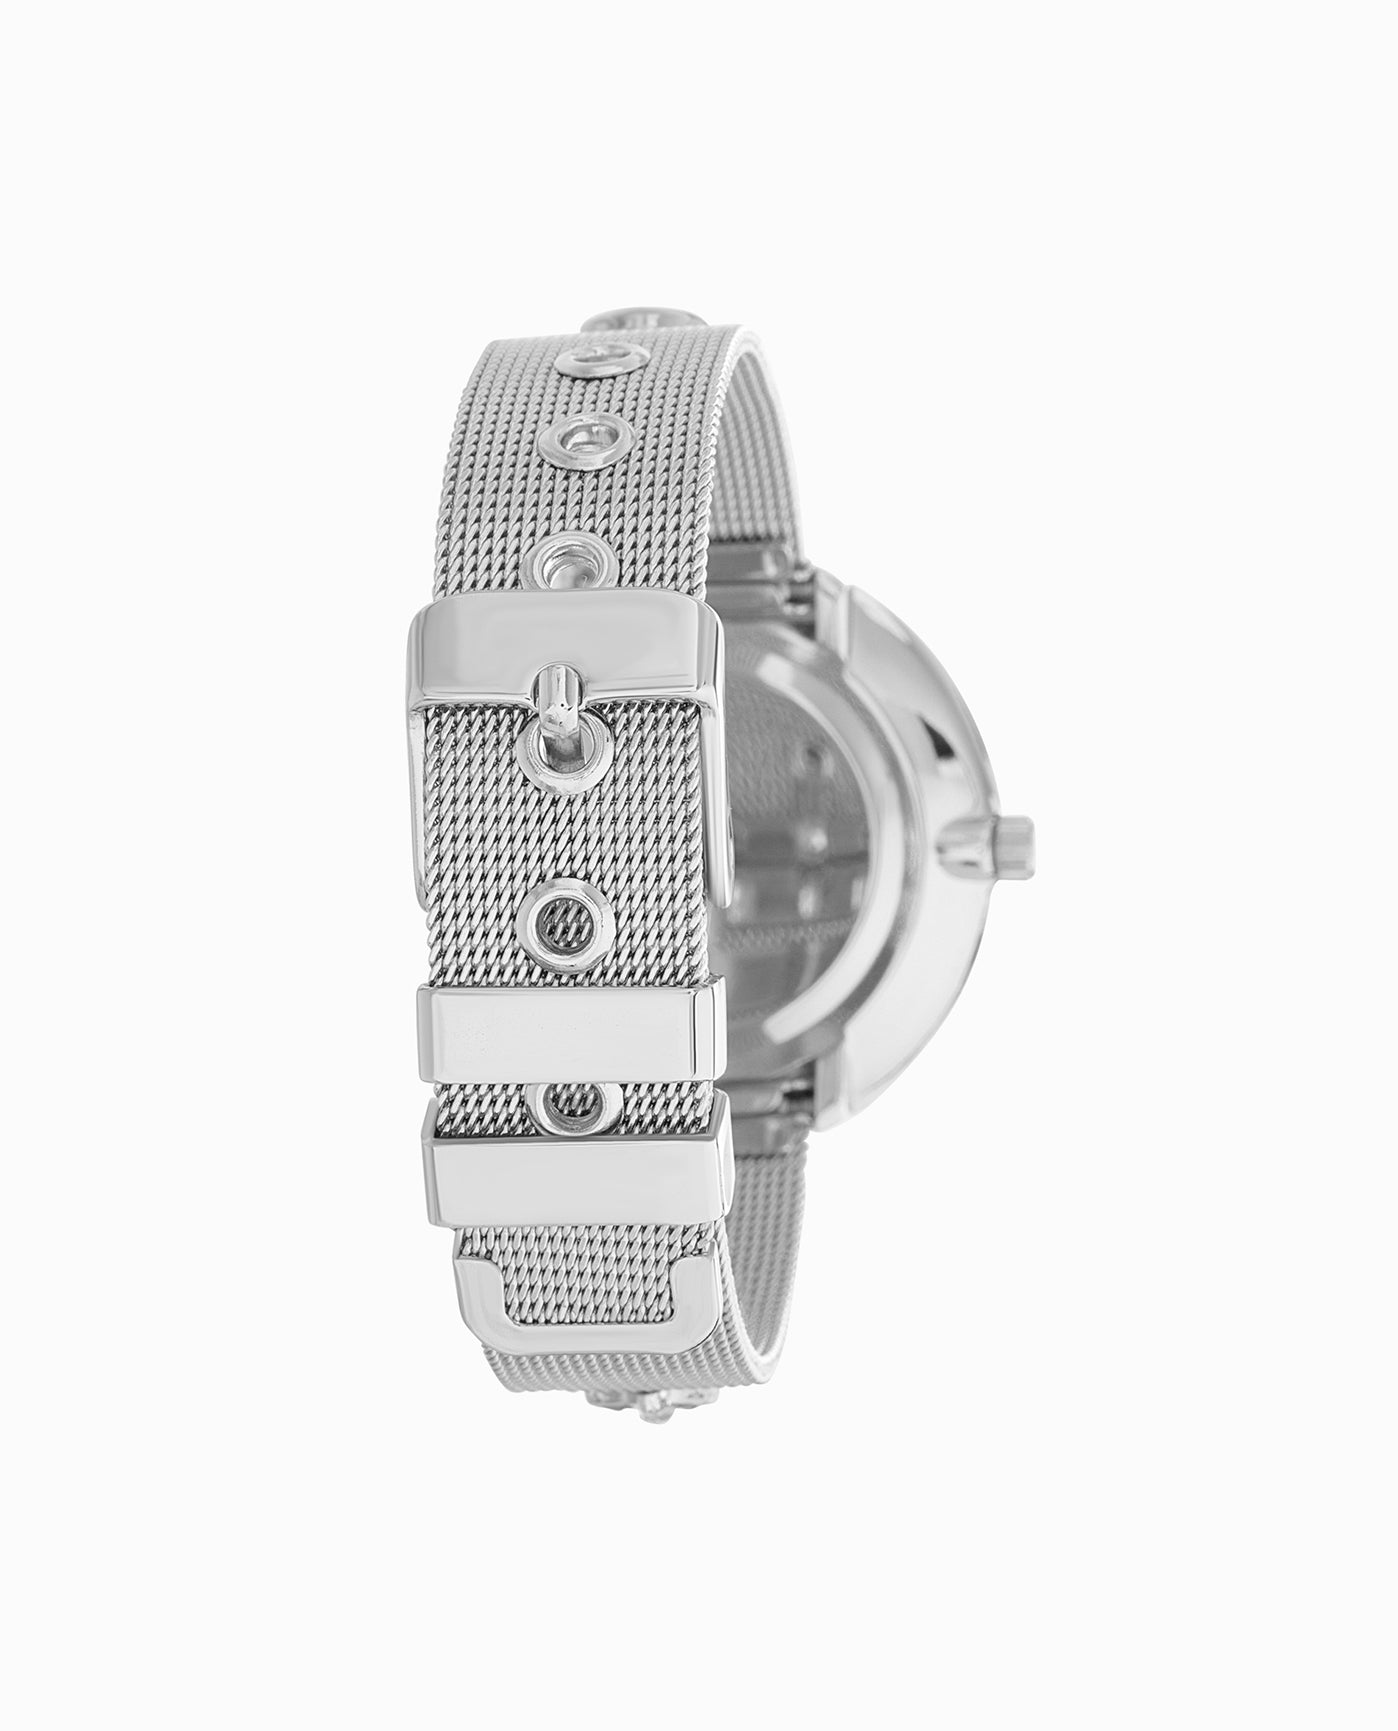 STAINLESS STEEL STRAP WATCH, 36mm BAND CLOSE UP | Silver